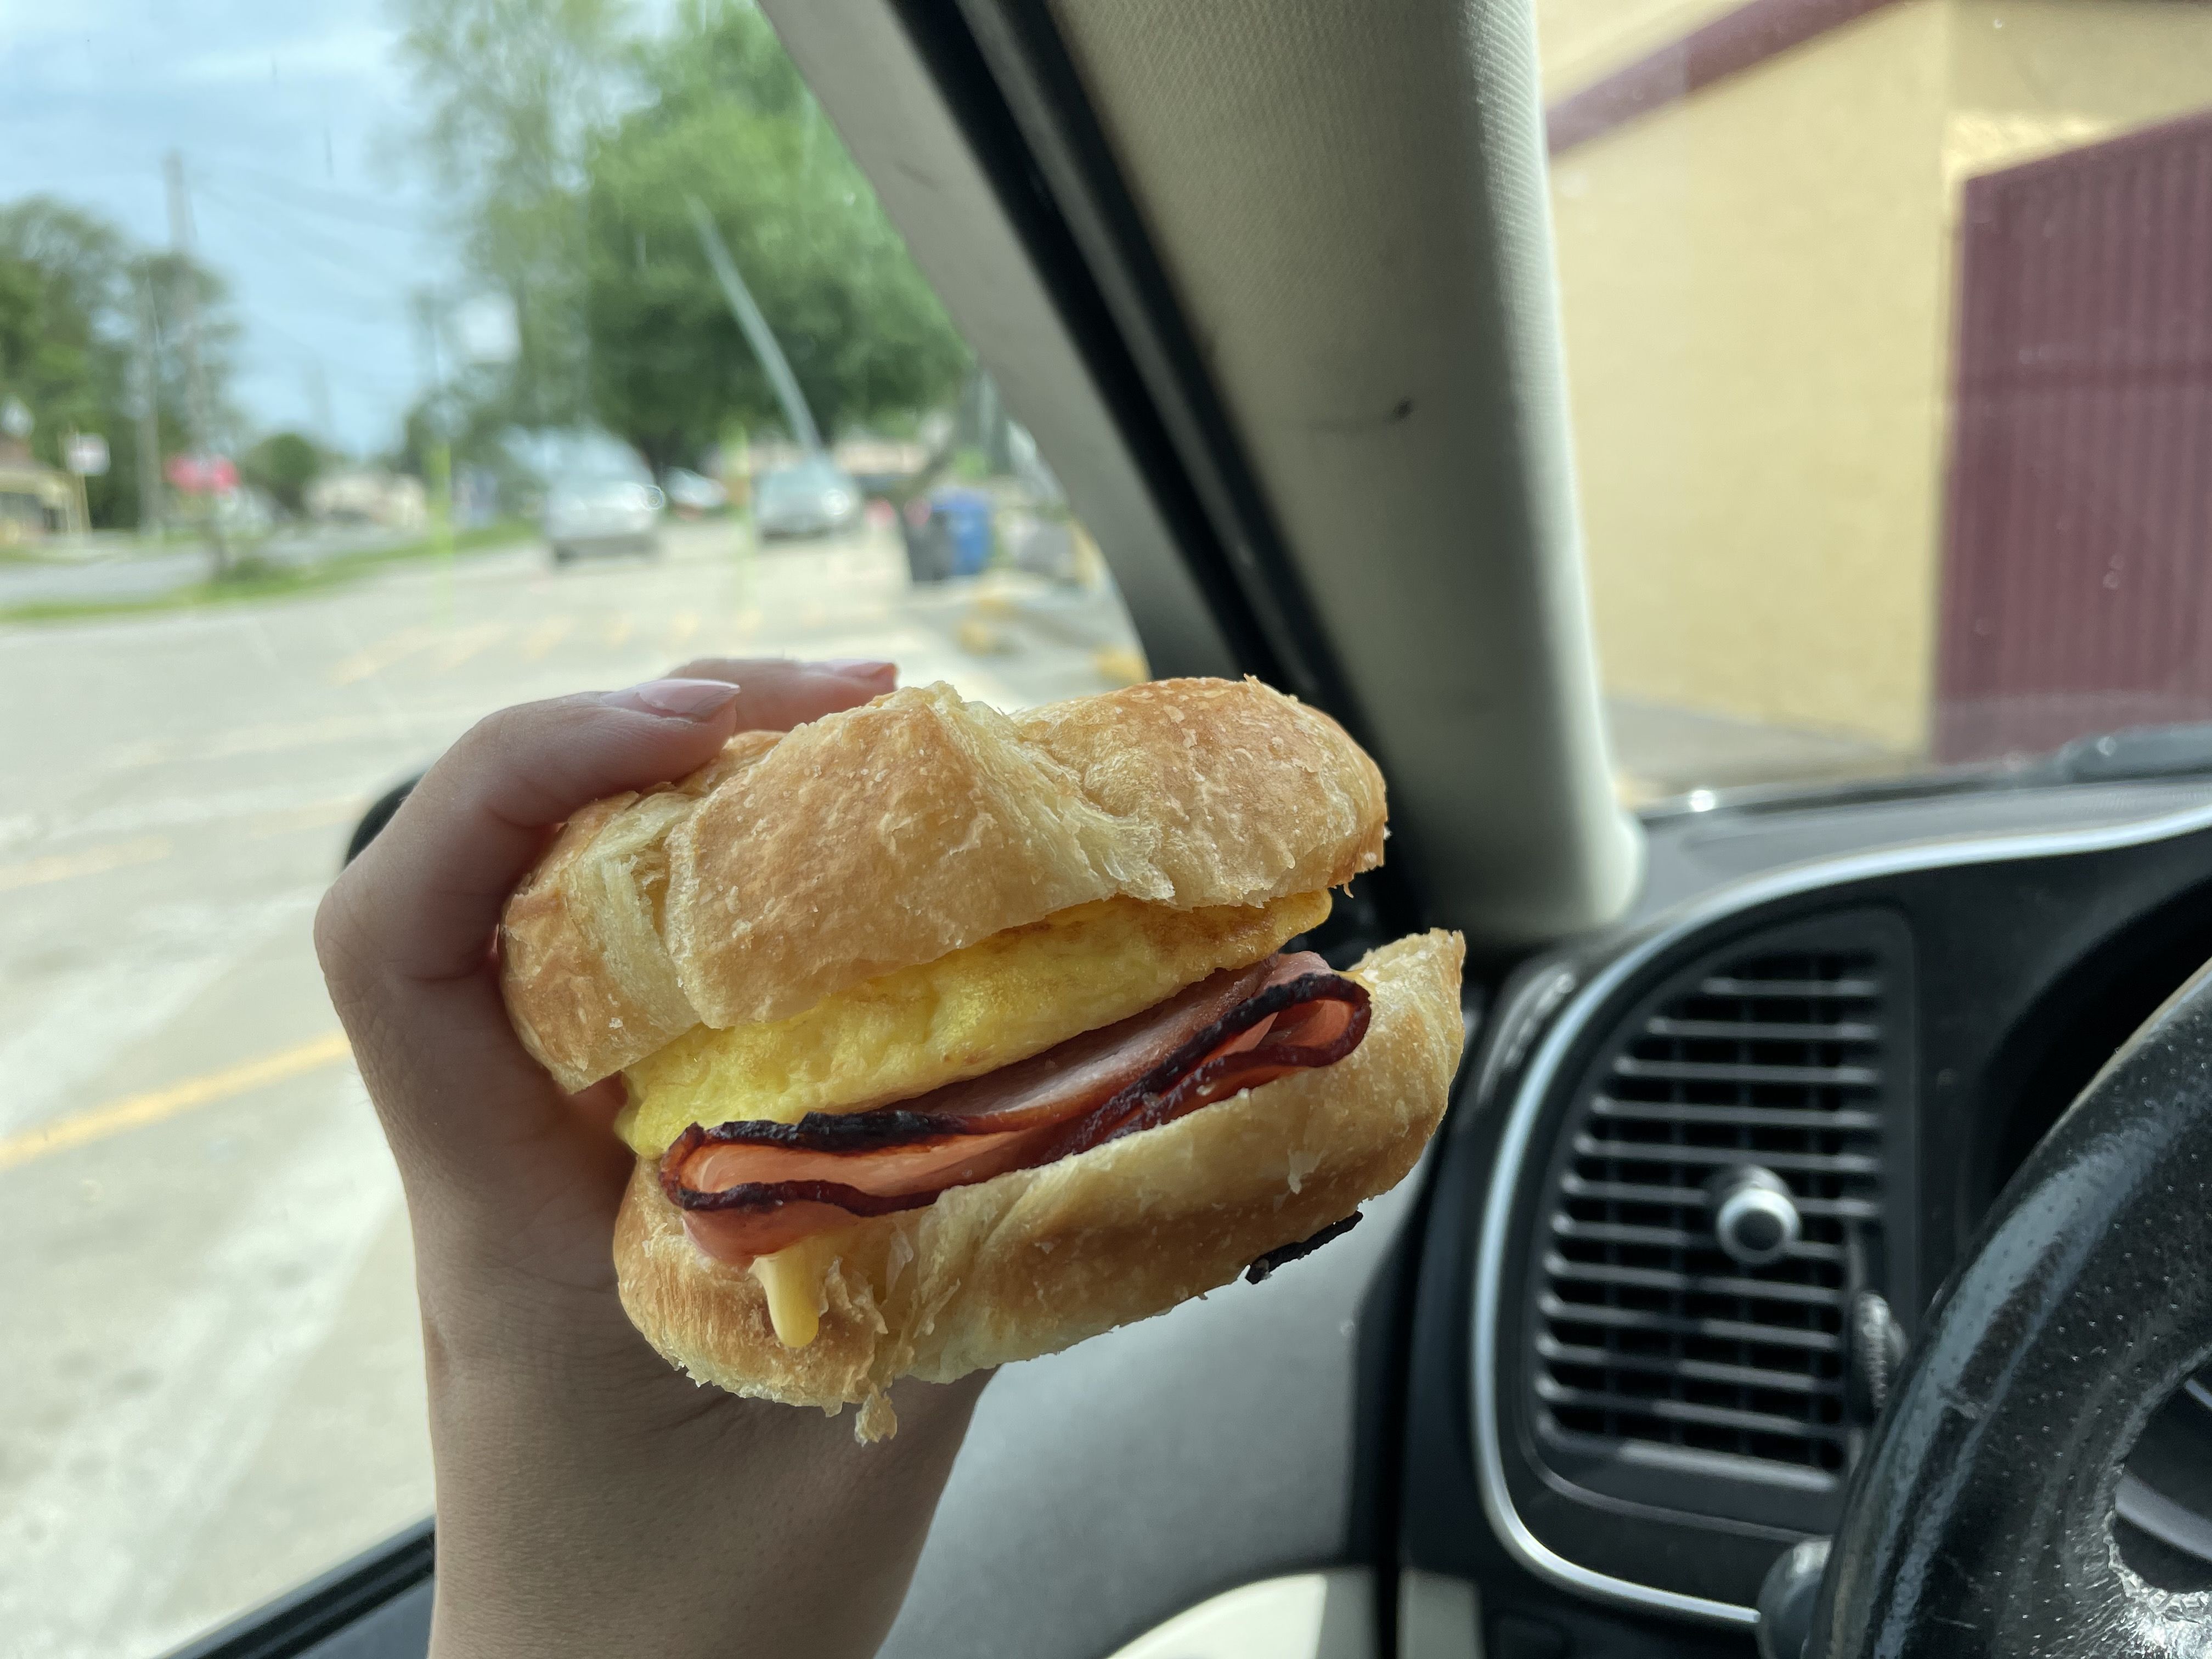 A ham, egg & cheese croissant from Casey's.